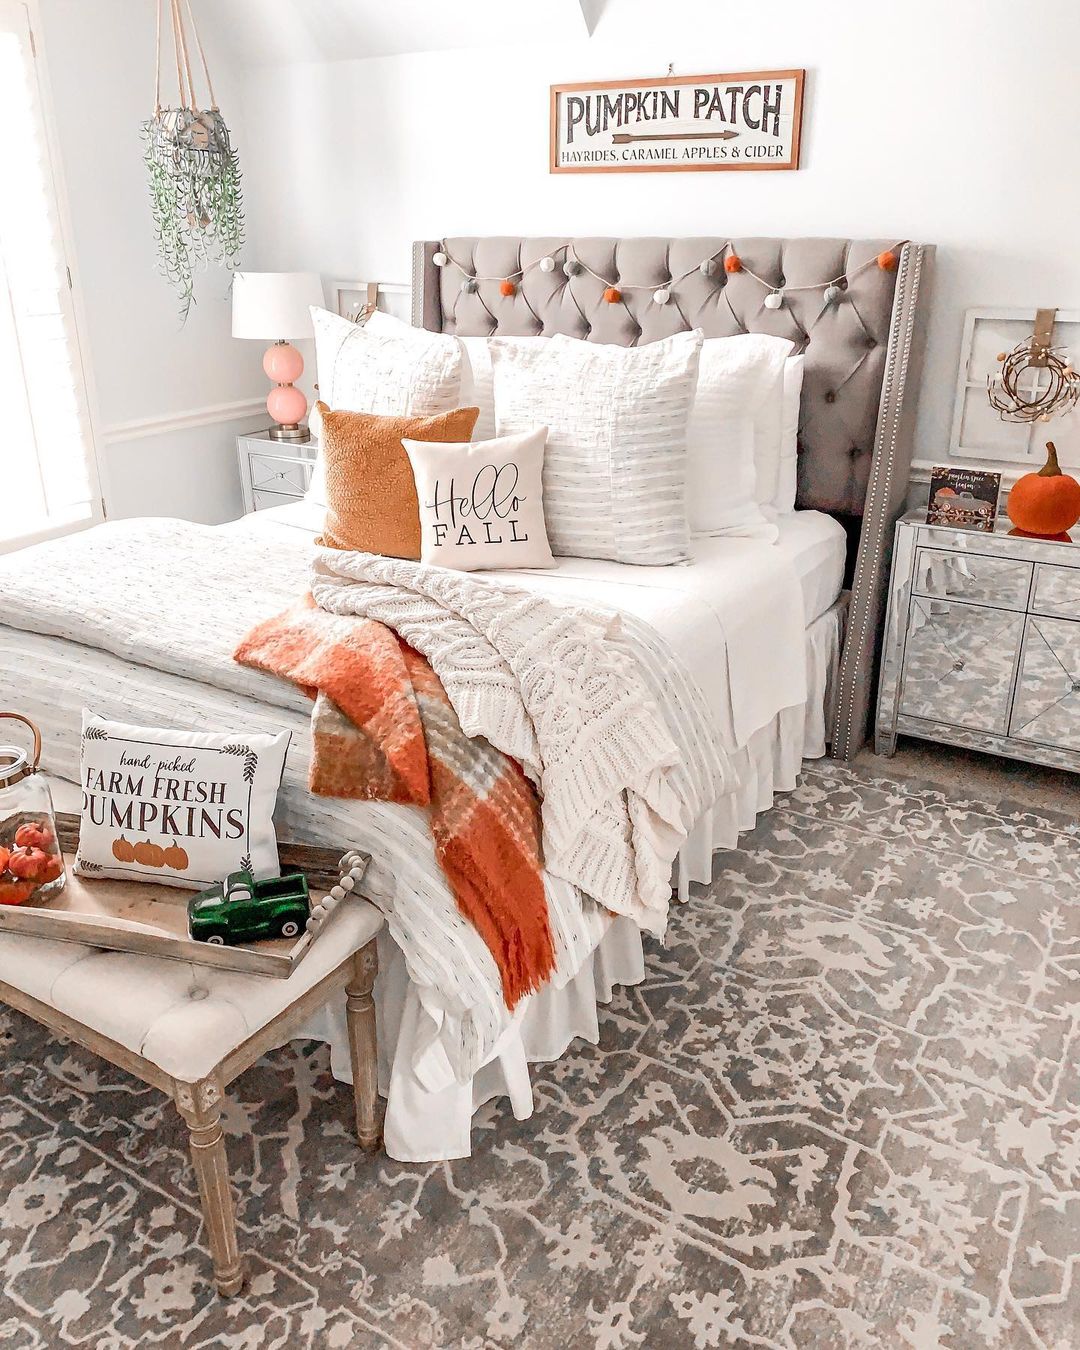 A guest bedroom with fall throw pillows and blankets on the bed and other fall decor throughout the space. Photo by Instagram user @rachelpuccetti.